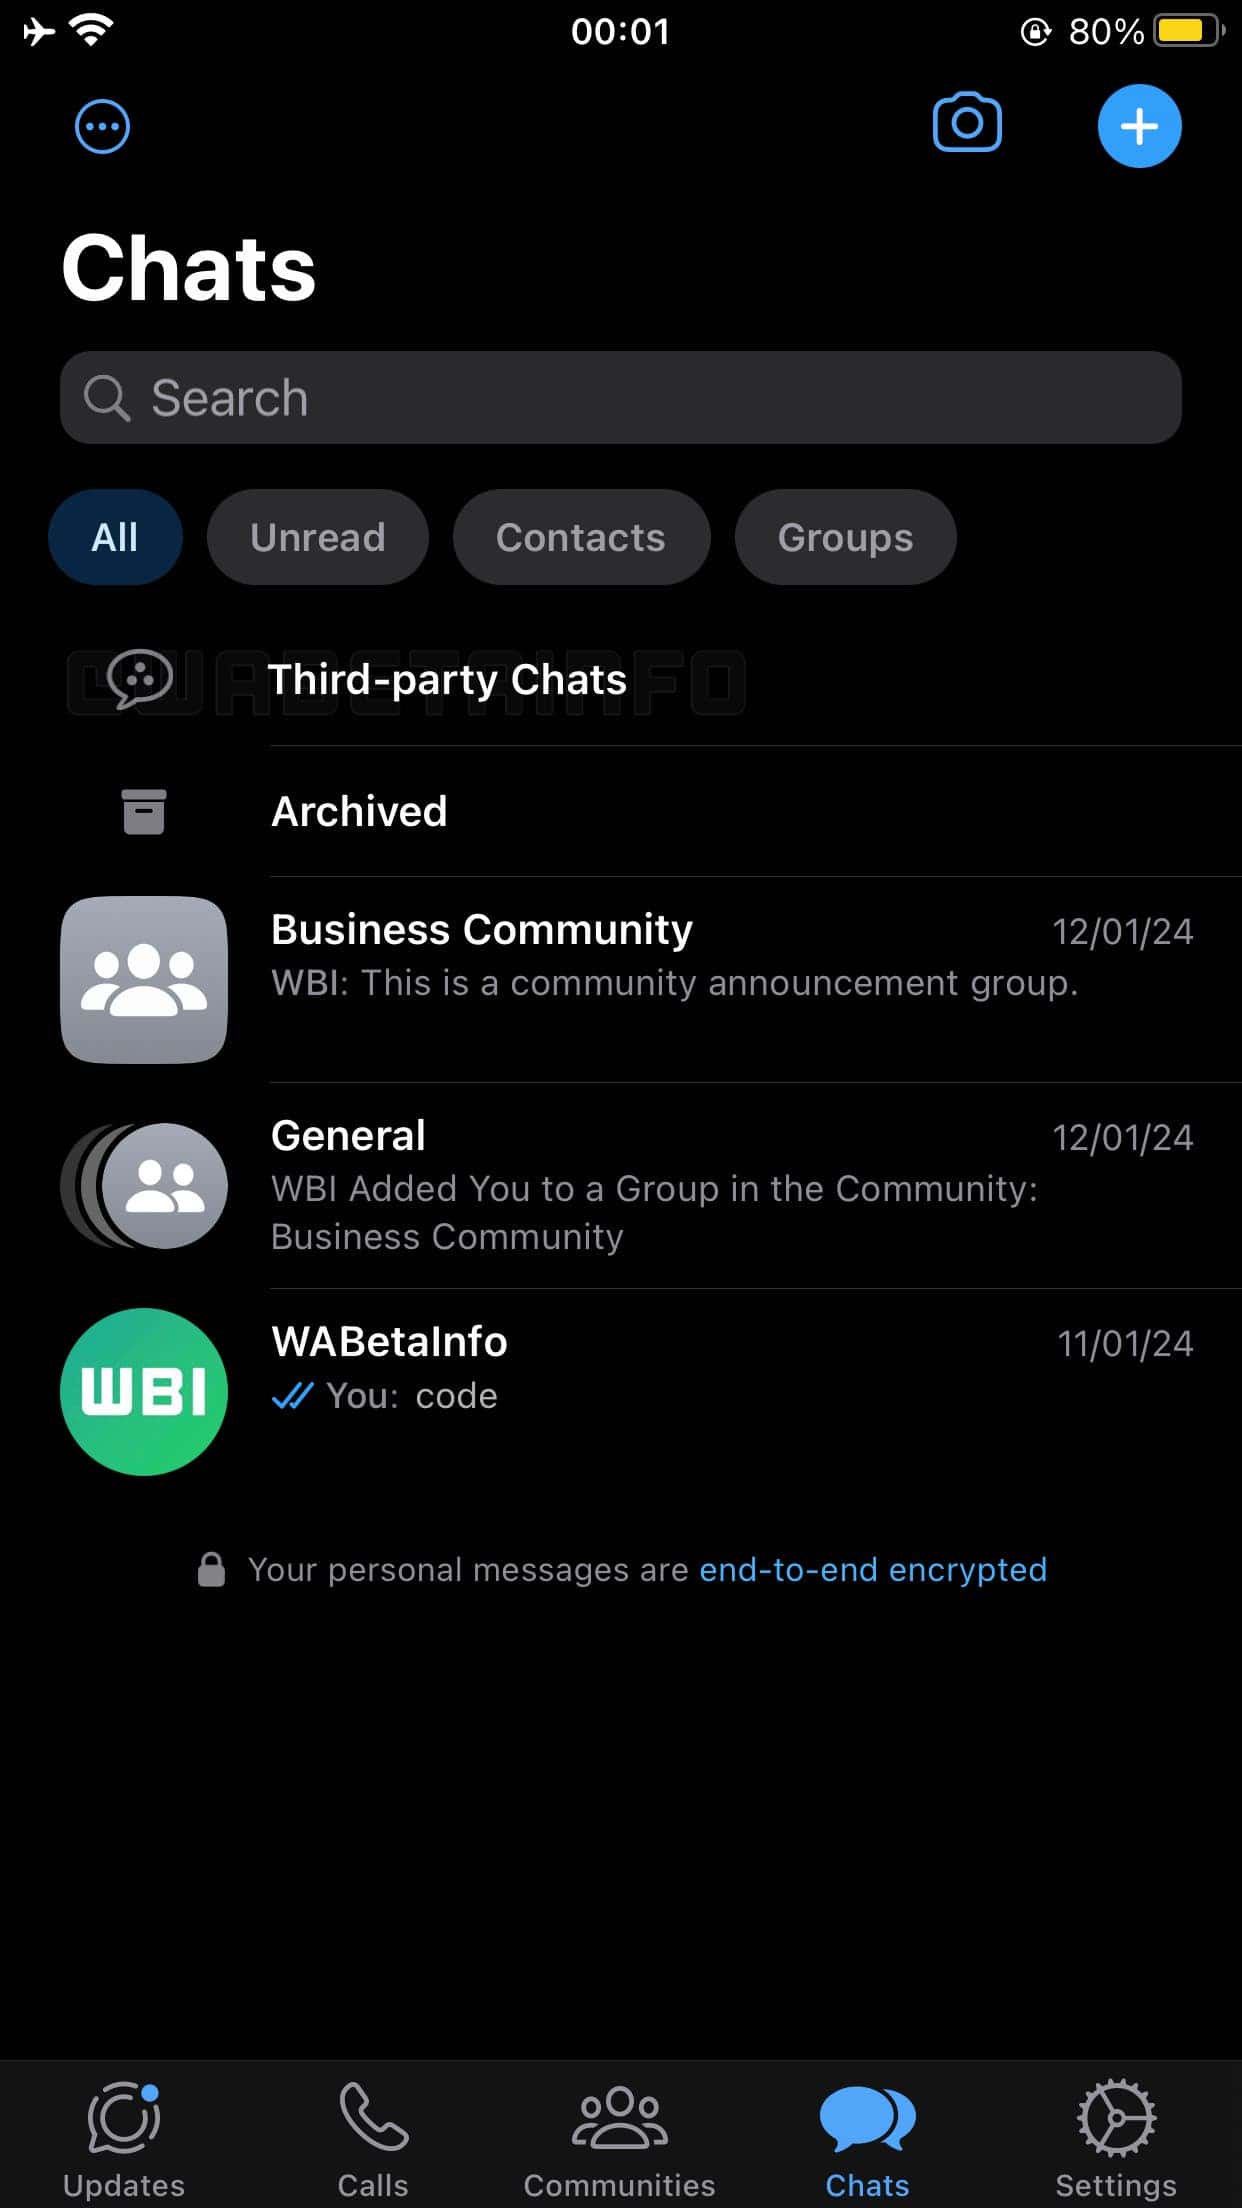 WhatsApp Integration with Other Encrypted Messaging Apps